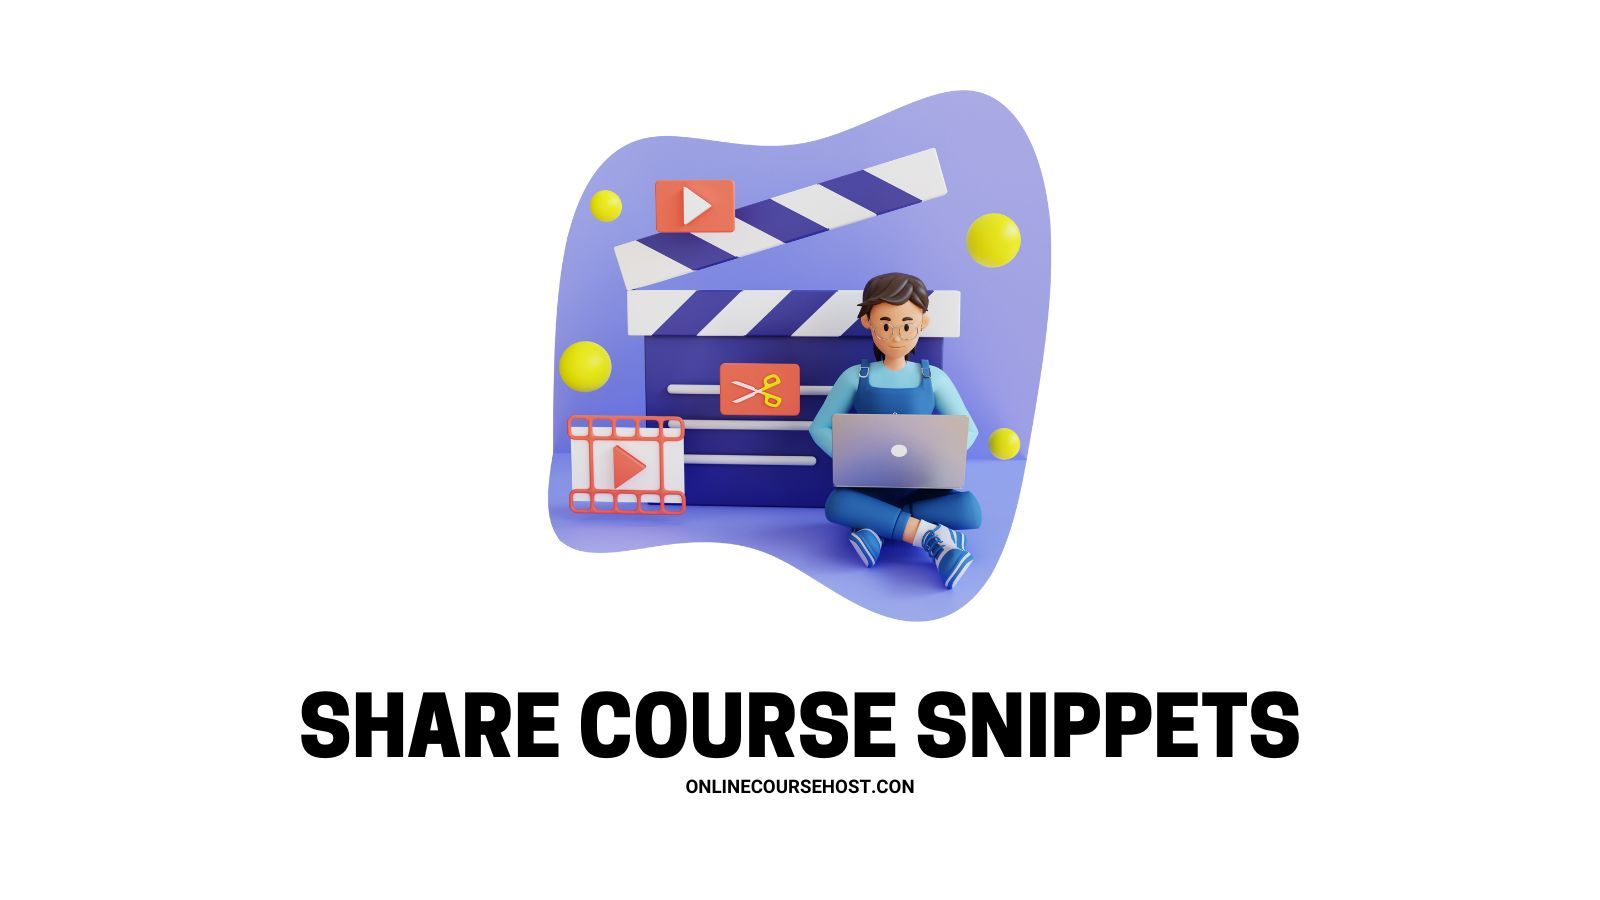 share course snippets on social media